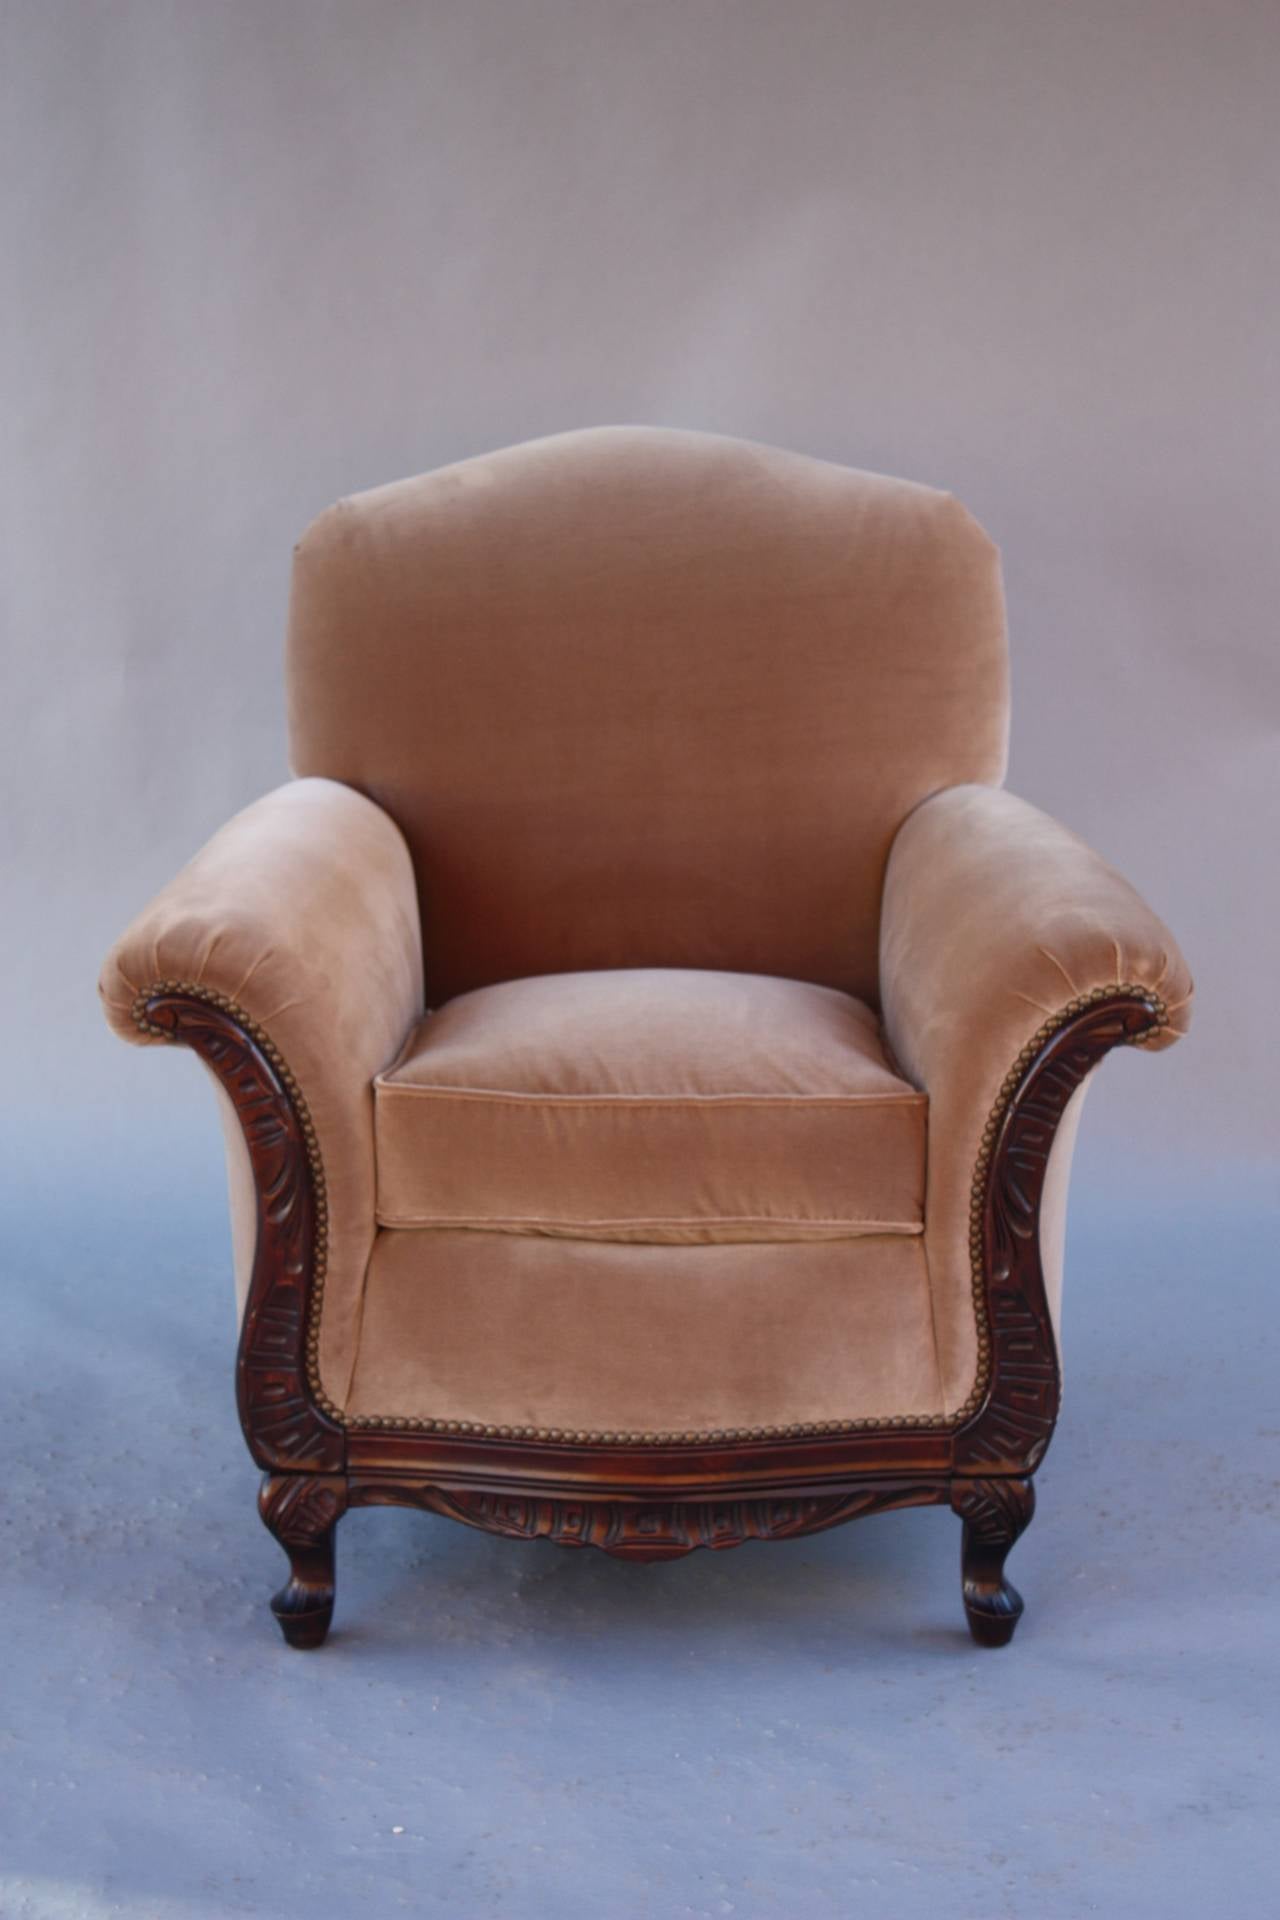 1920s carved walnut side chair with new belgium velvet upholstery. Measures:36.5